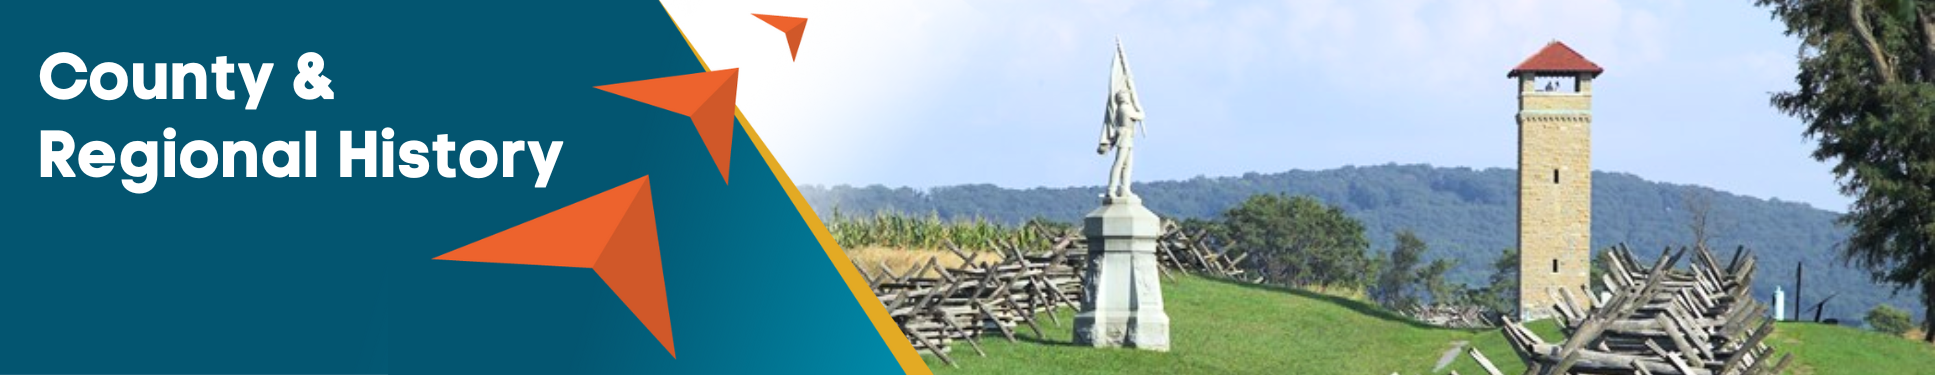 County & Regional History banner with three orange arrows pointing to image of statue and tower at the Antietam Battlefield.